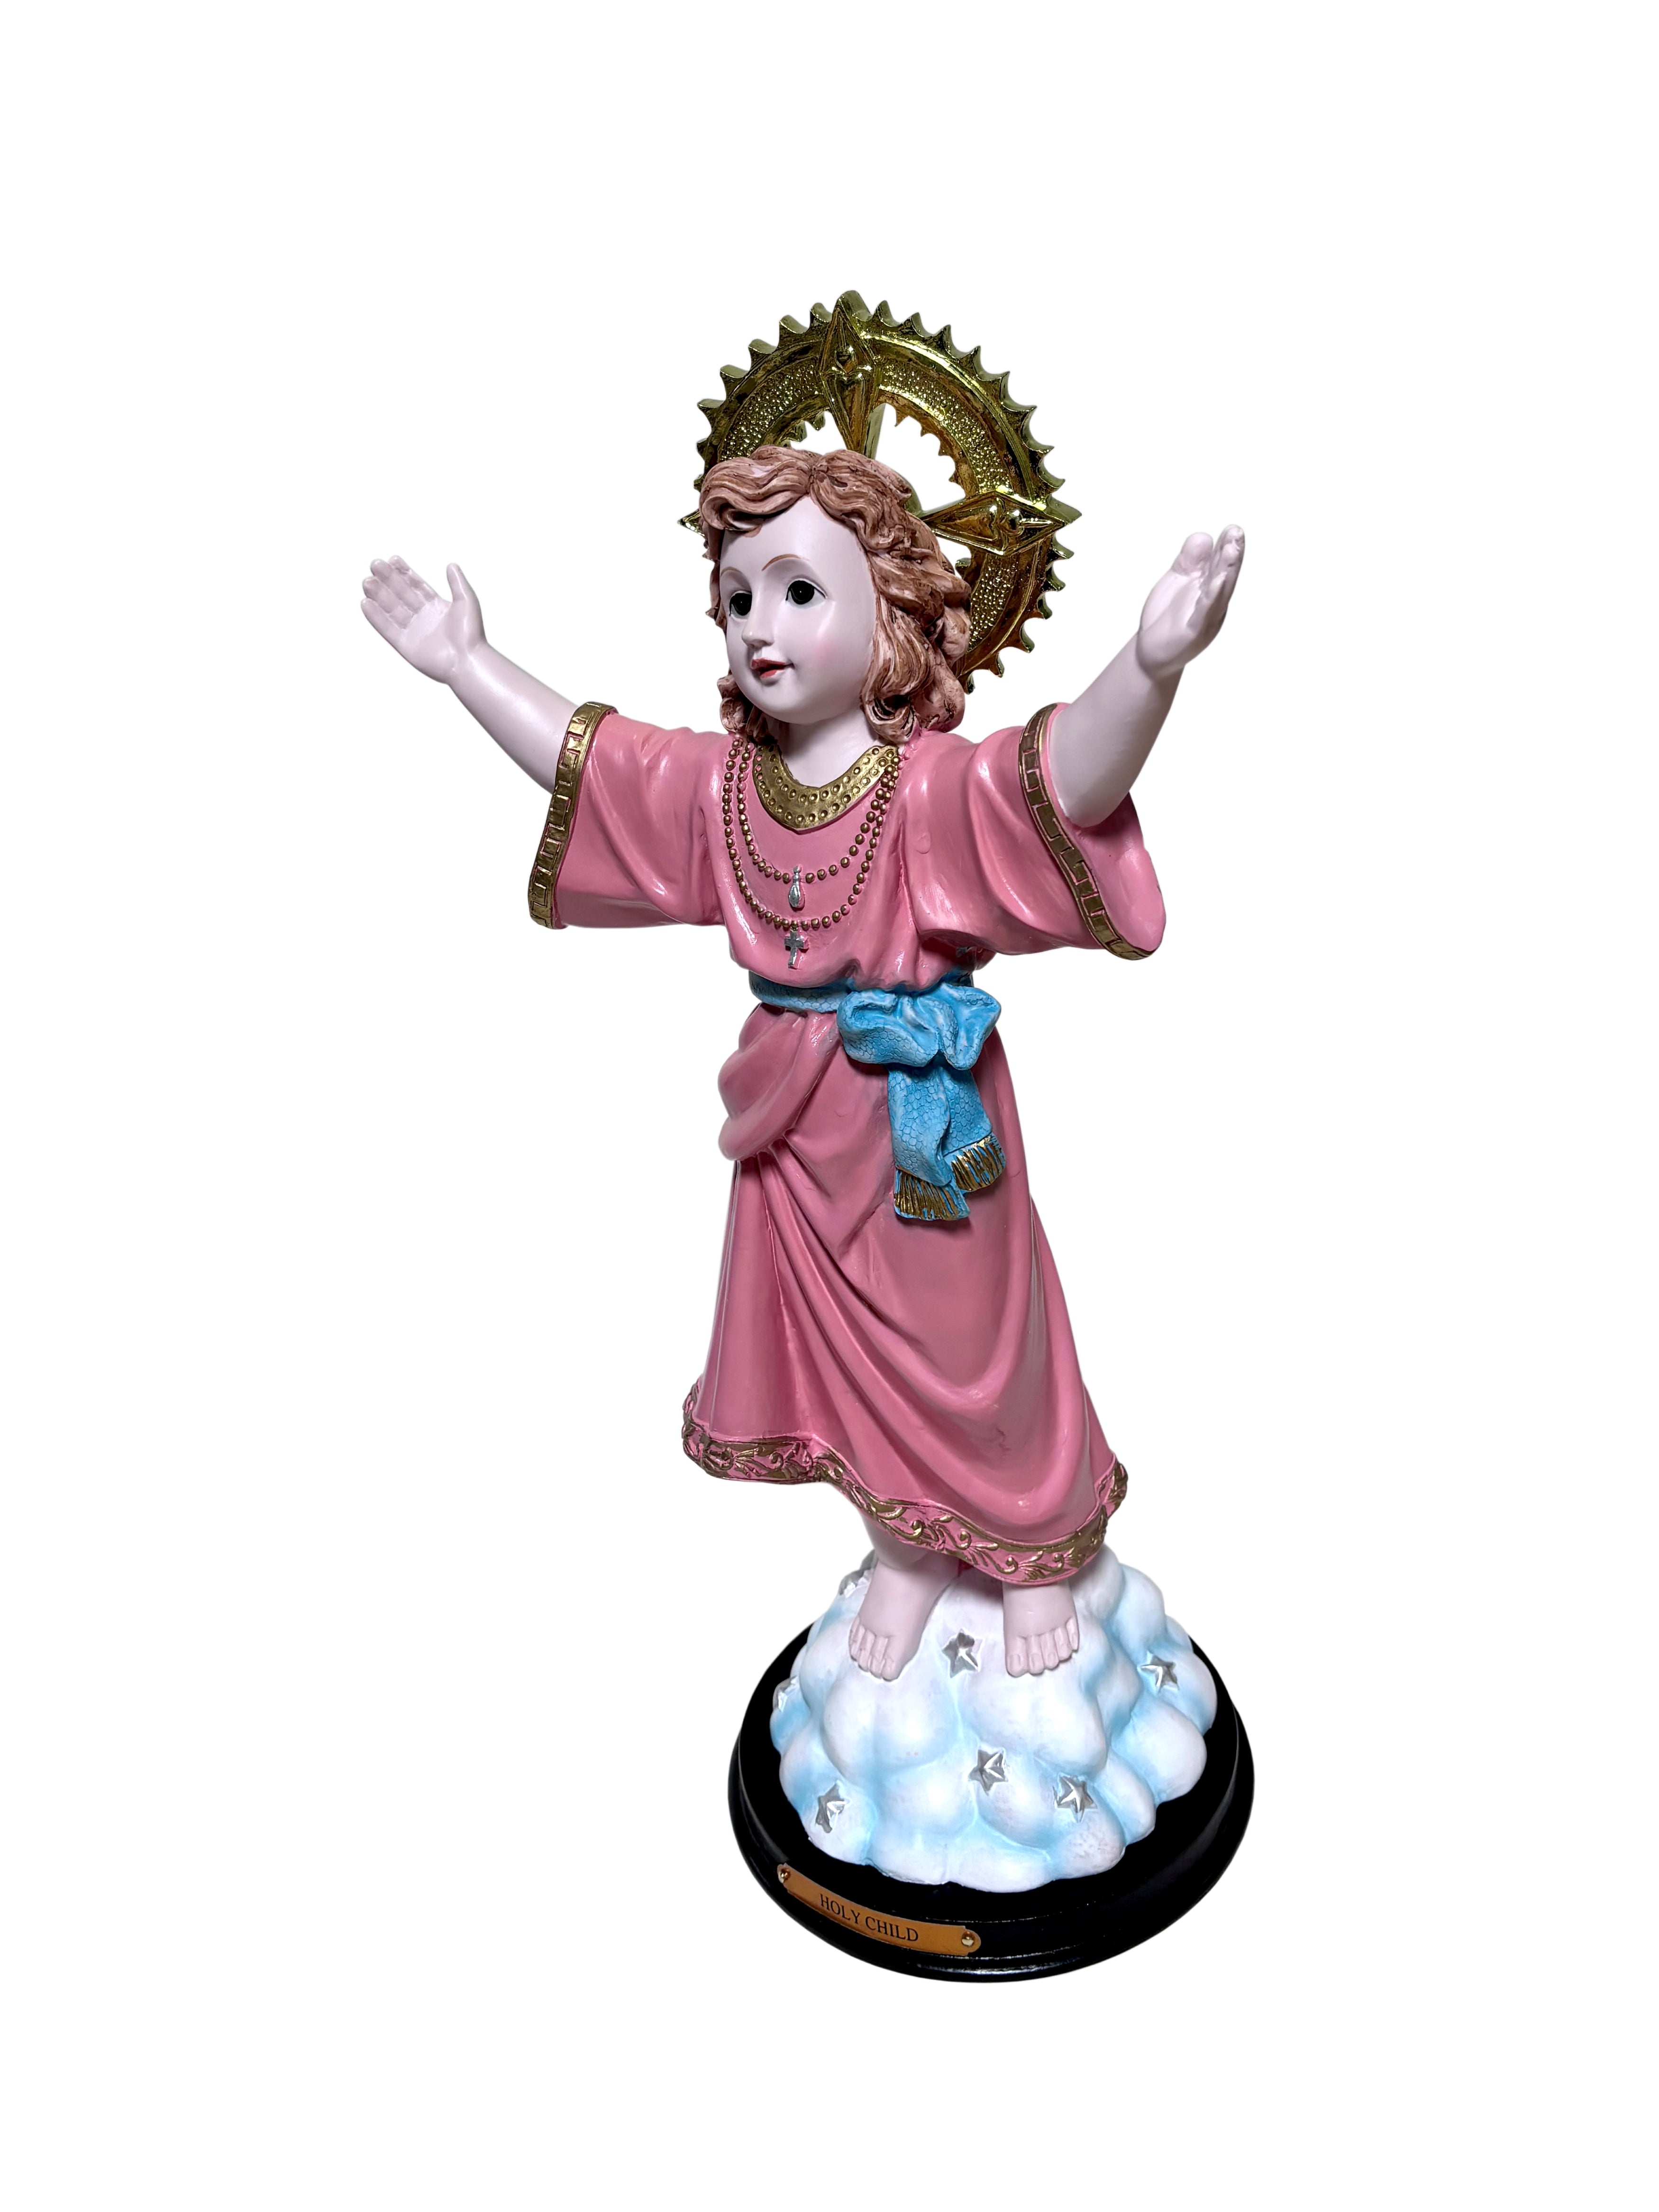 Religious statue of the Divine Child 16" height